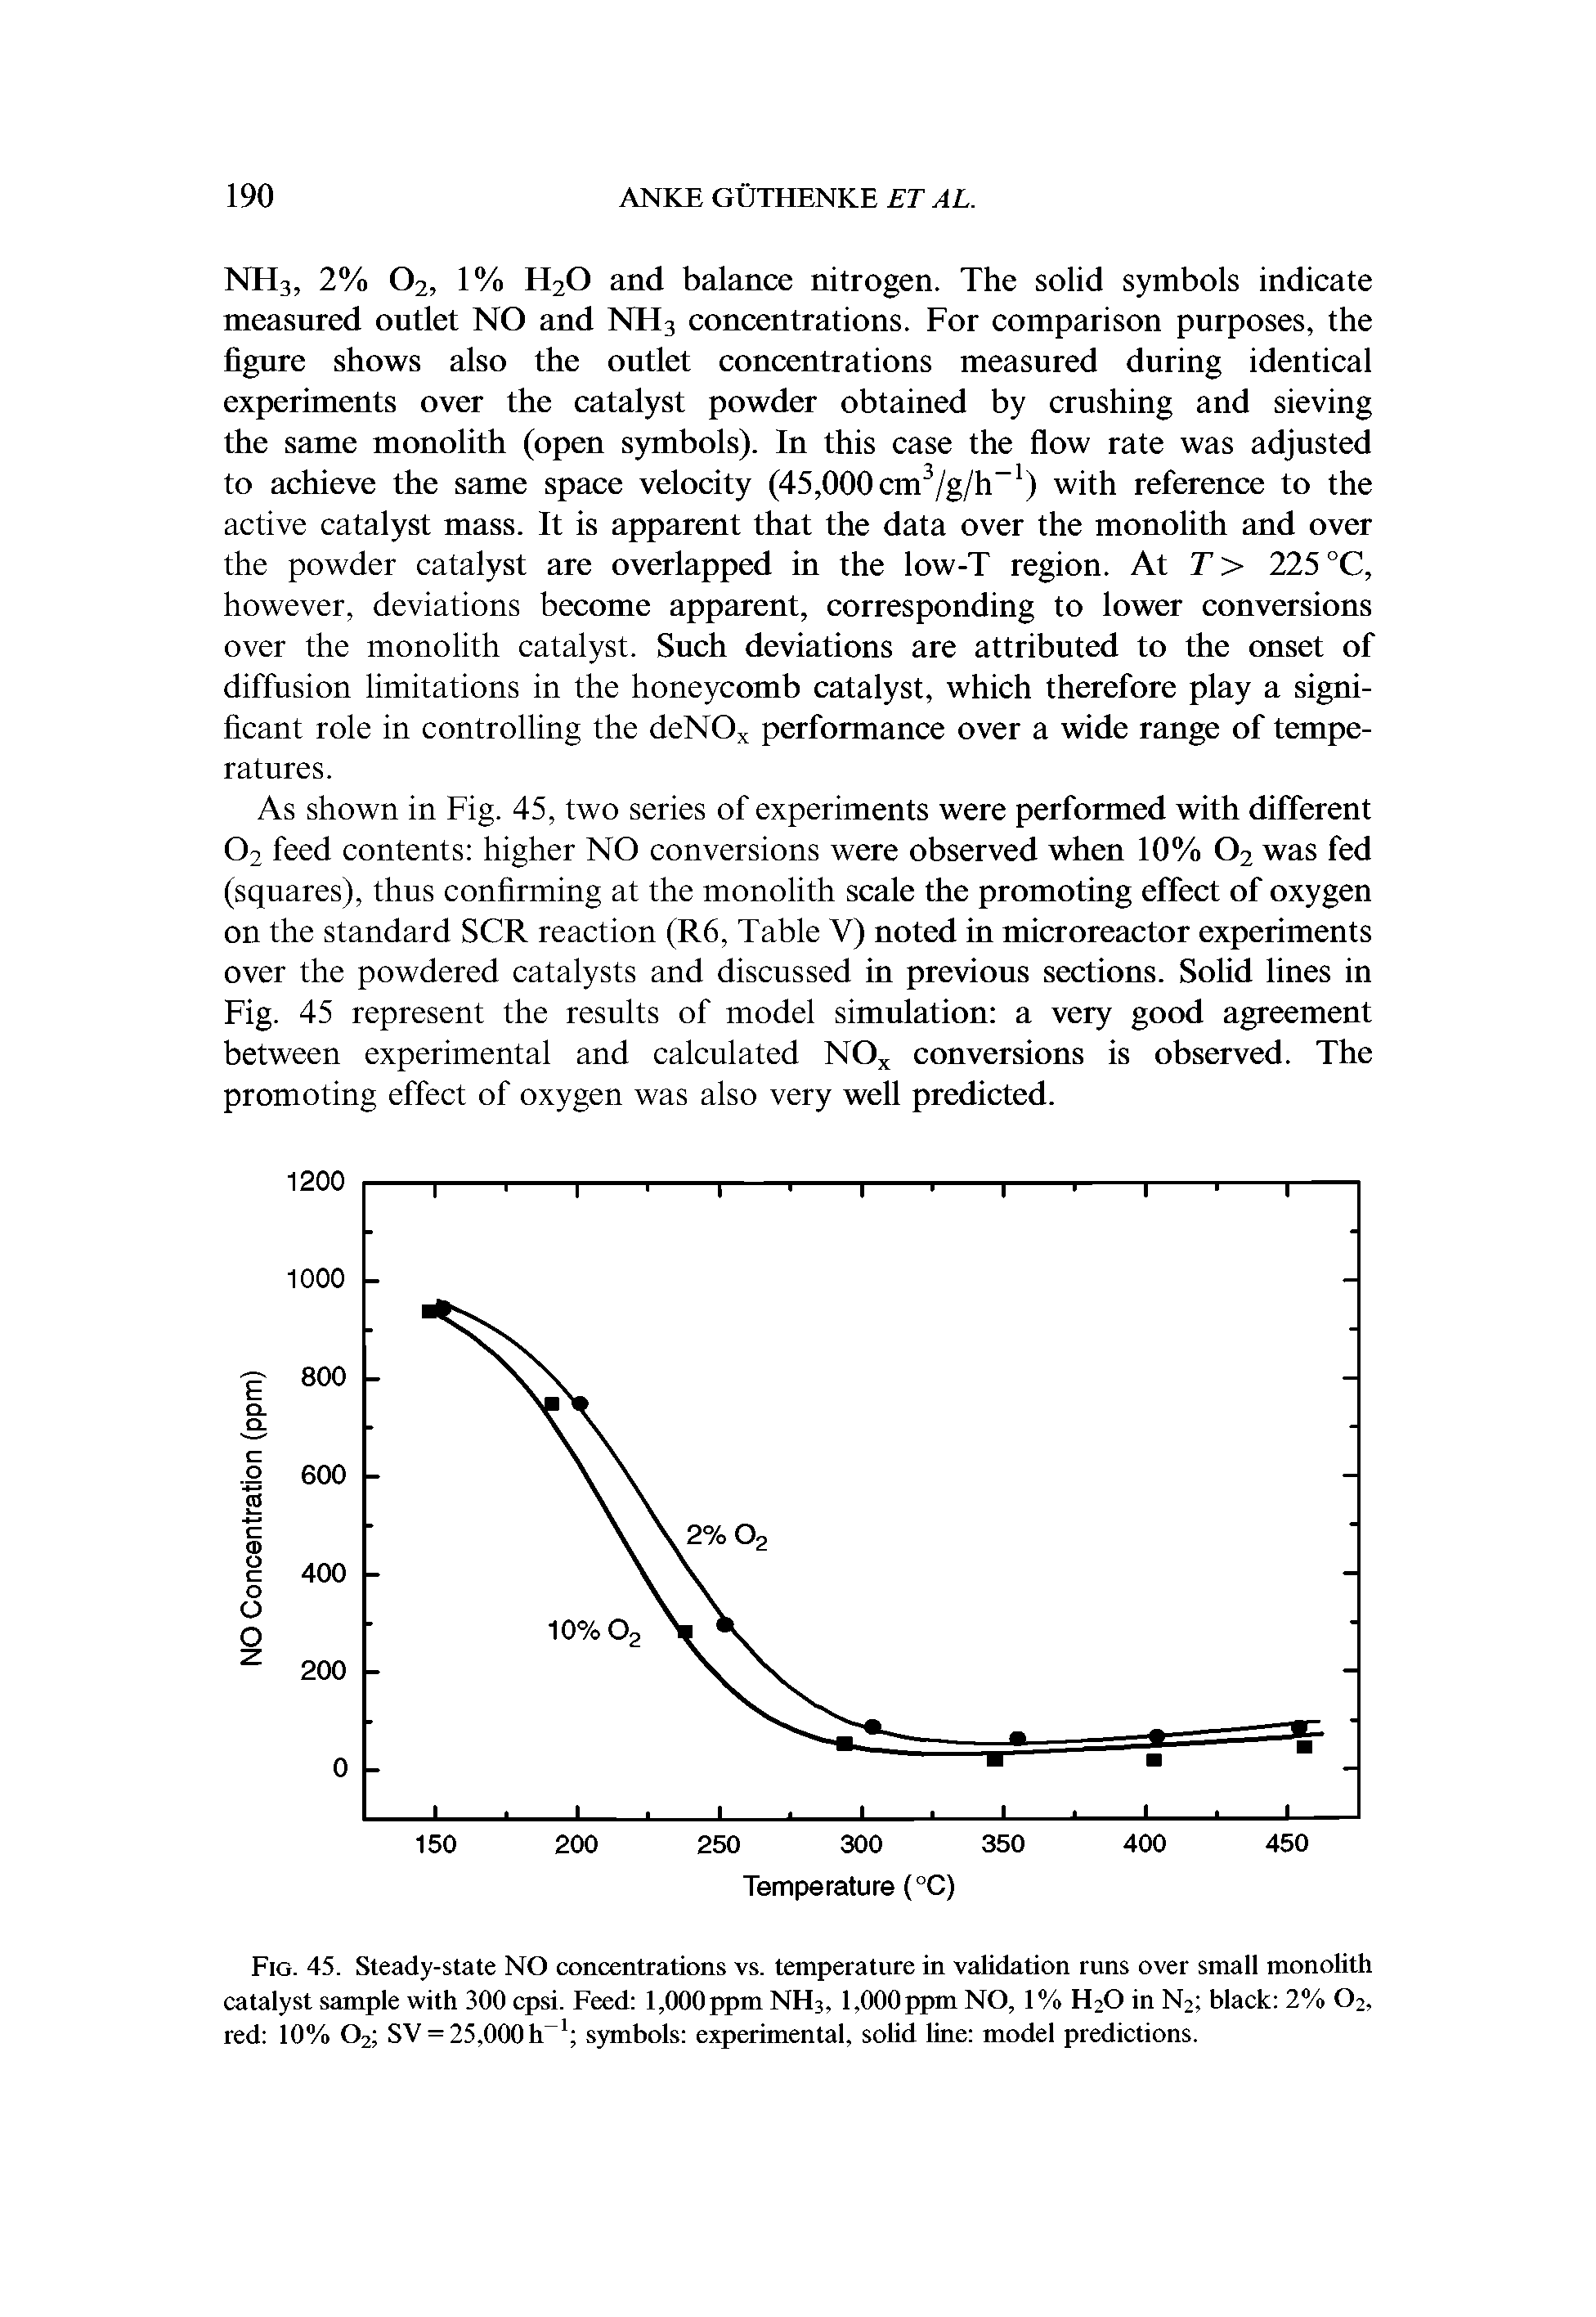 Fig. 45. Steady-state NO concentrations vs. temperature in validation runs over small monolith catalyst sample with 300 cpsi. Feed 1,000 ppm NH3, 1,000 ppm NO, 1% H2O in N2 black 2% O2, red 10% Oz SV = 25,000 h symbols experimental, solid line model predictions.